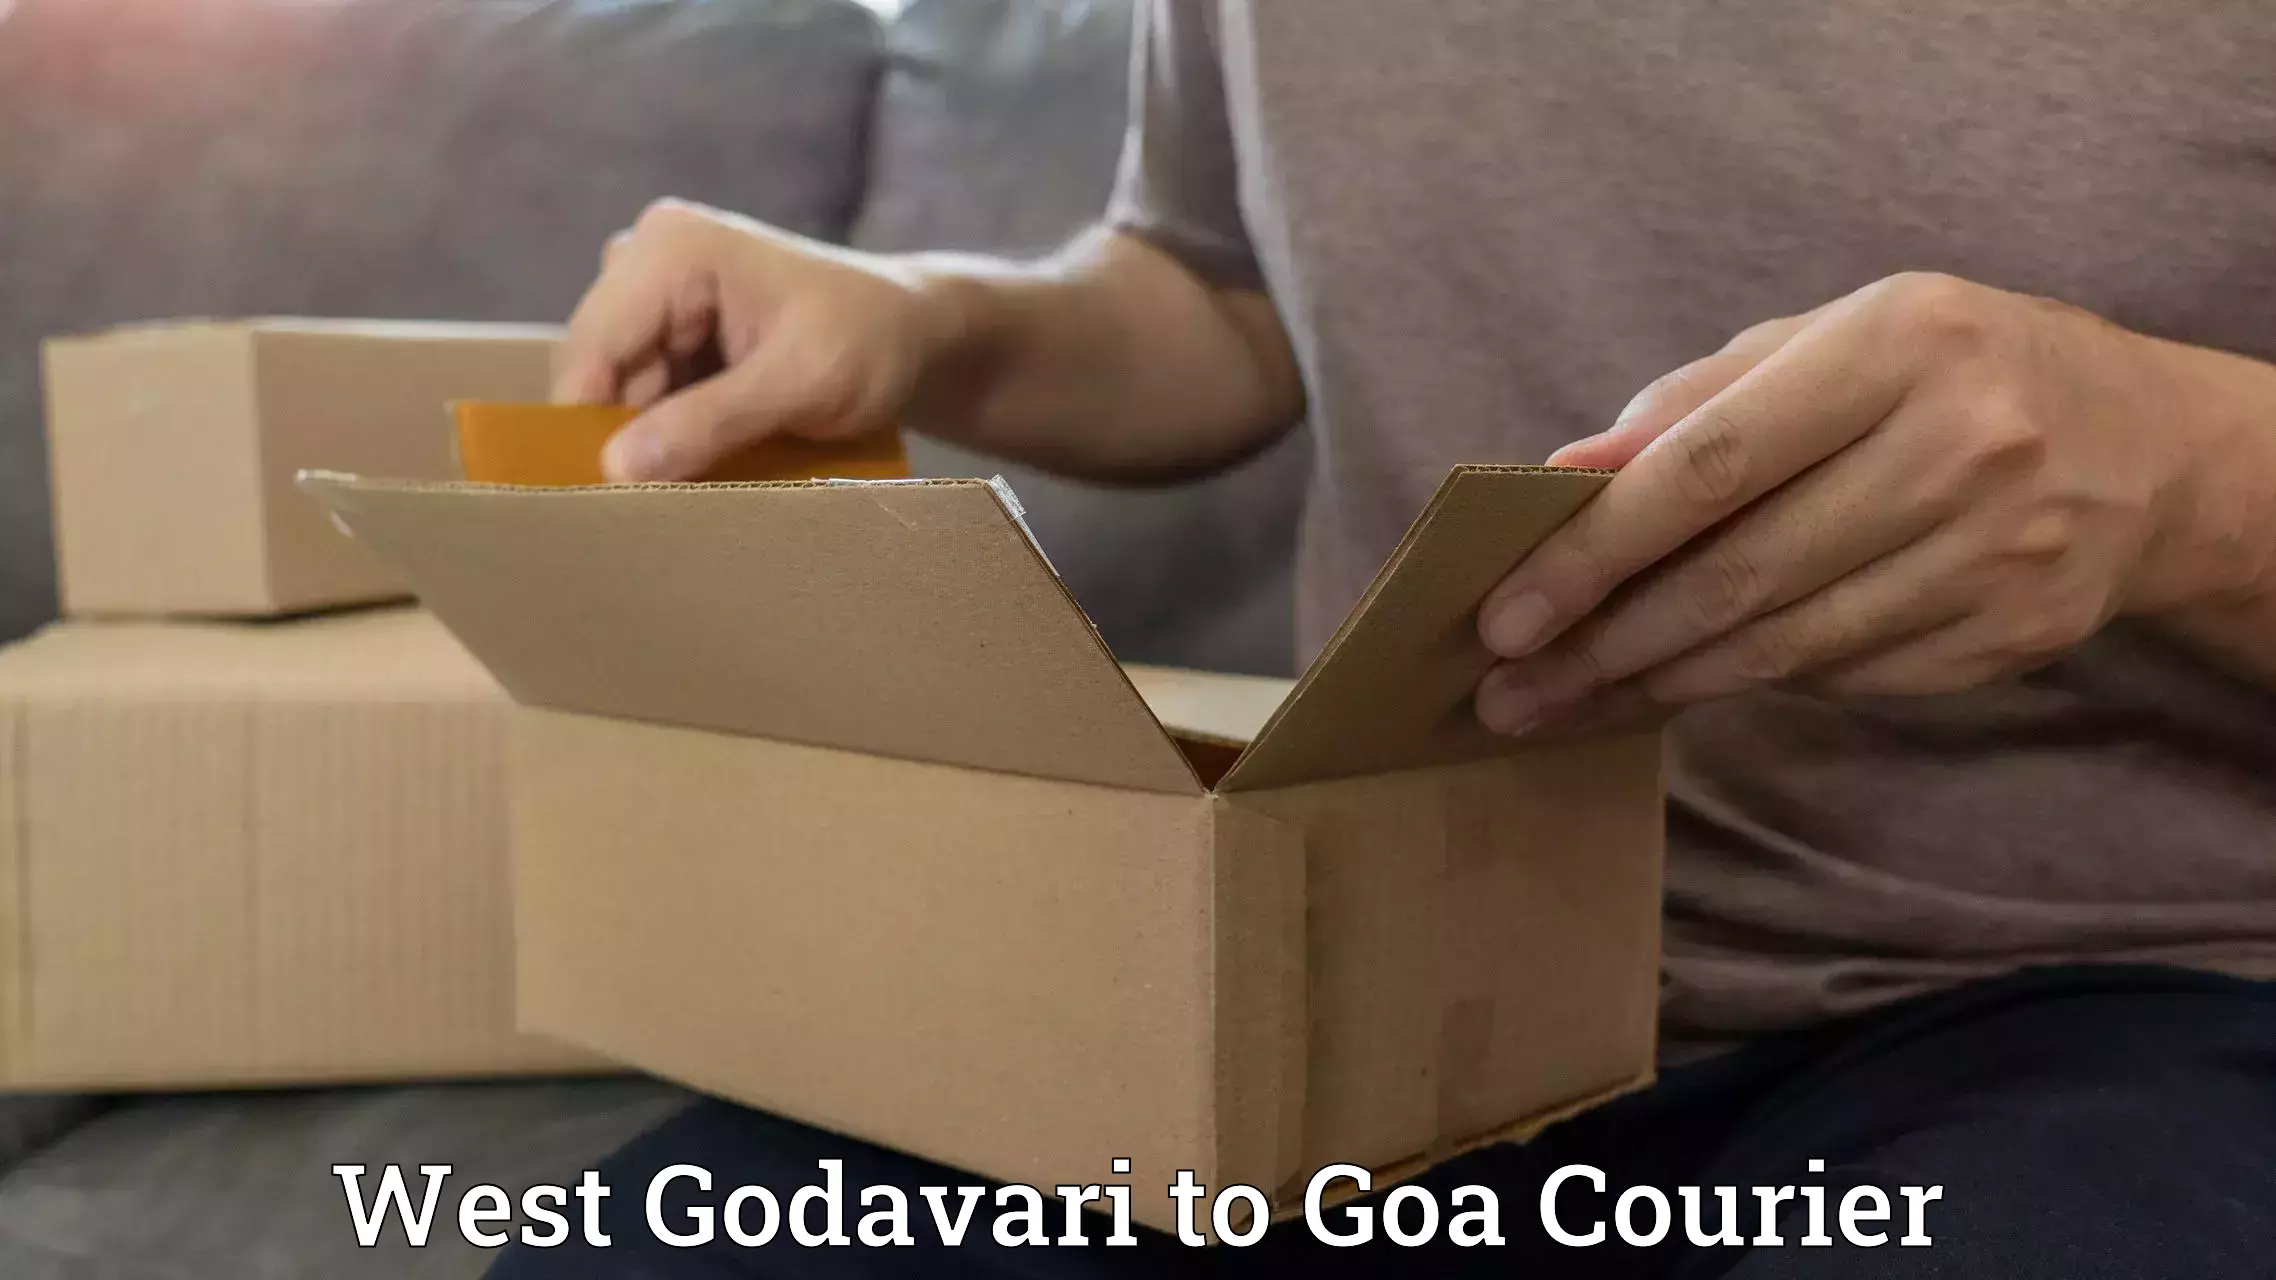 State-of-the-art courier technology West Godavari to South Goa